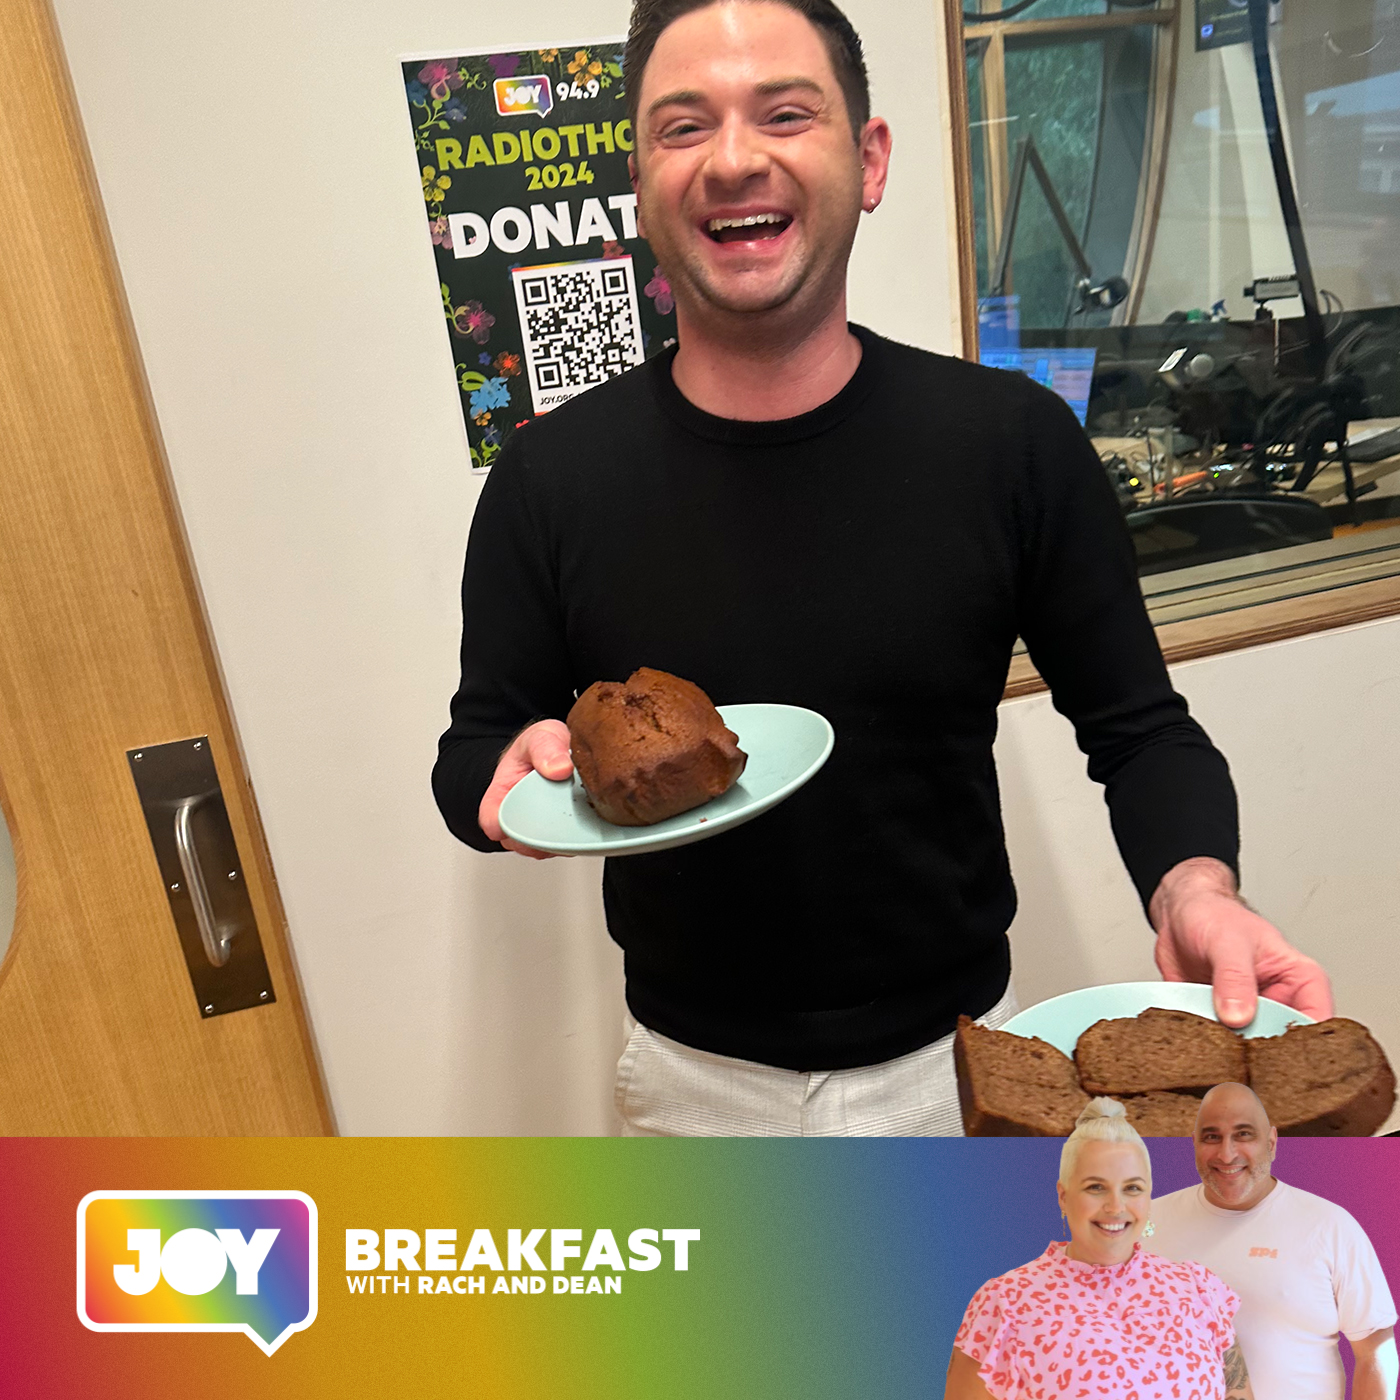 Whose cake is superior in the JOY Breakky Bake Off